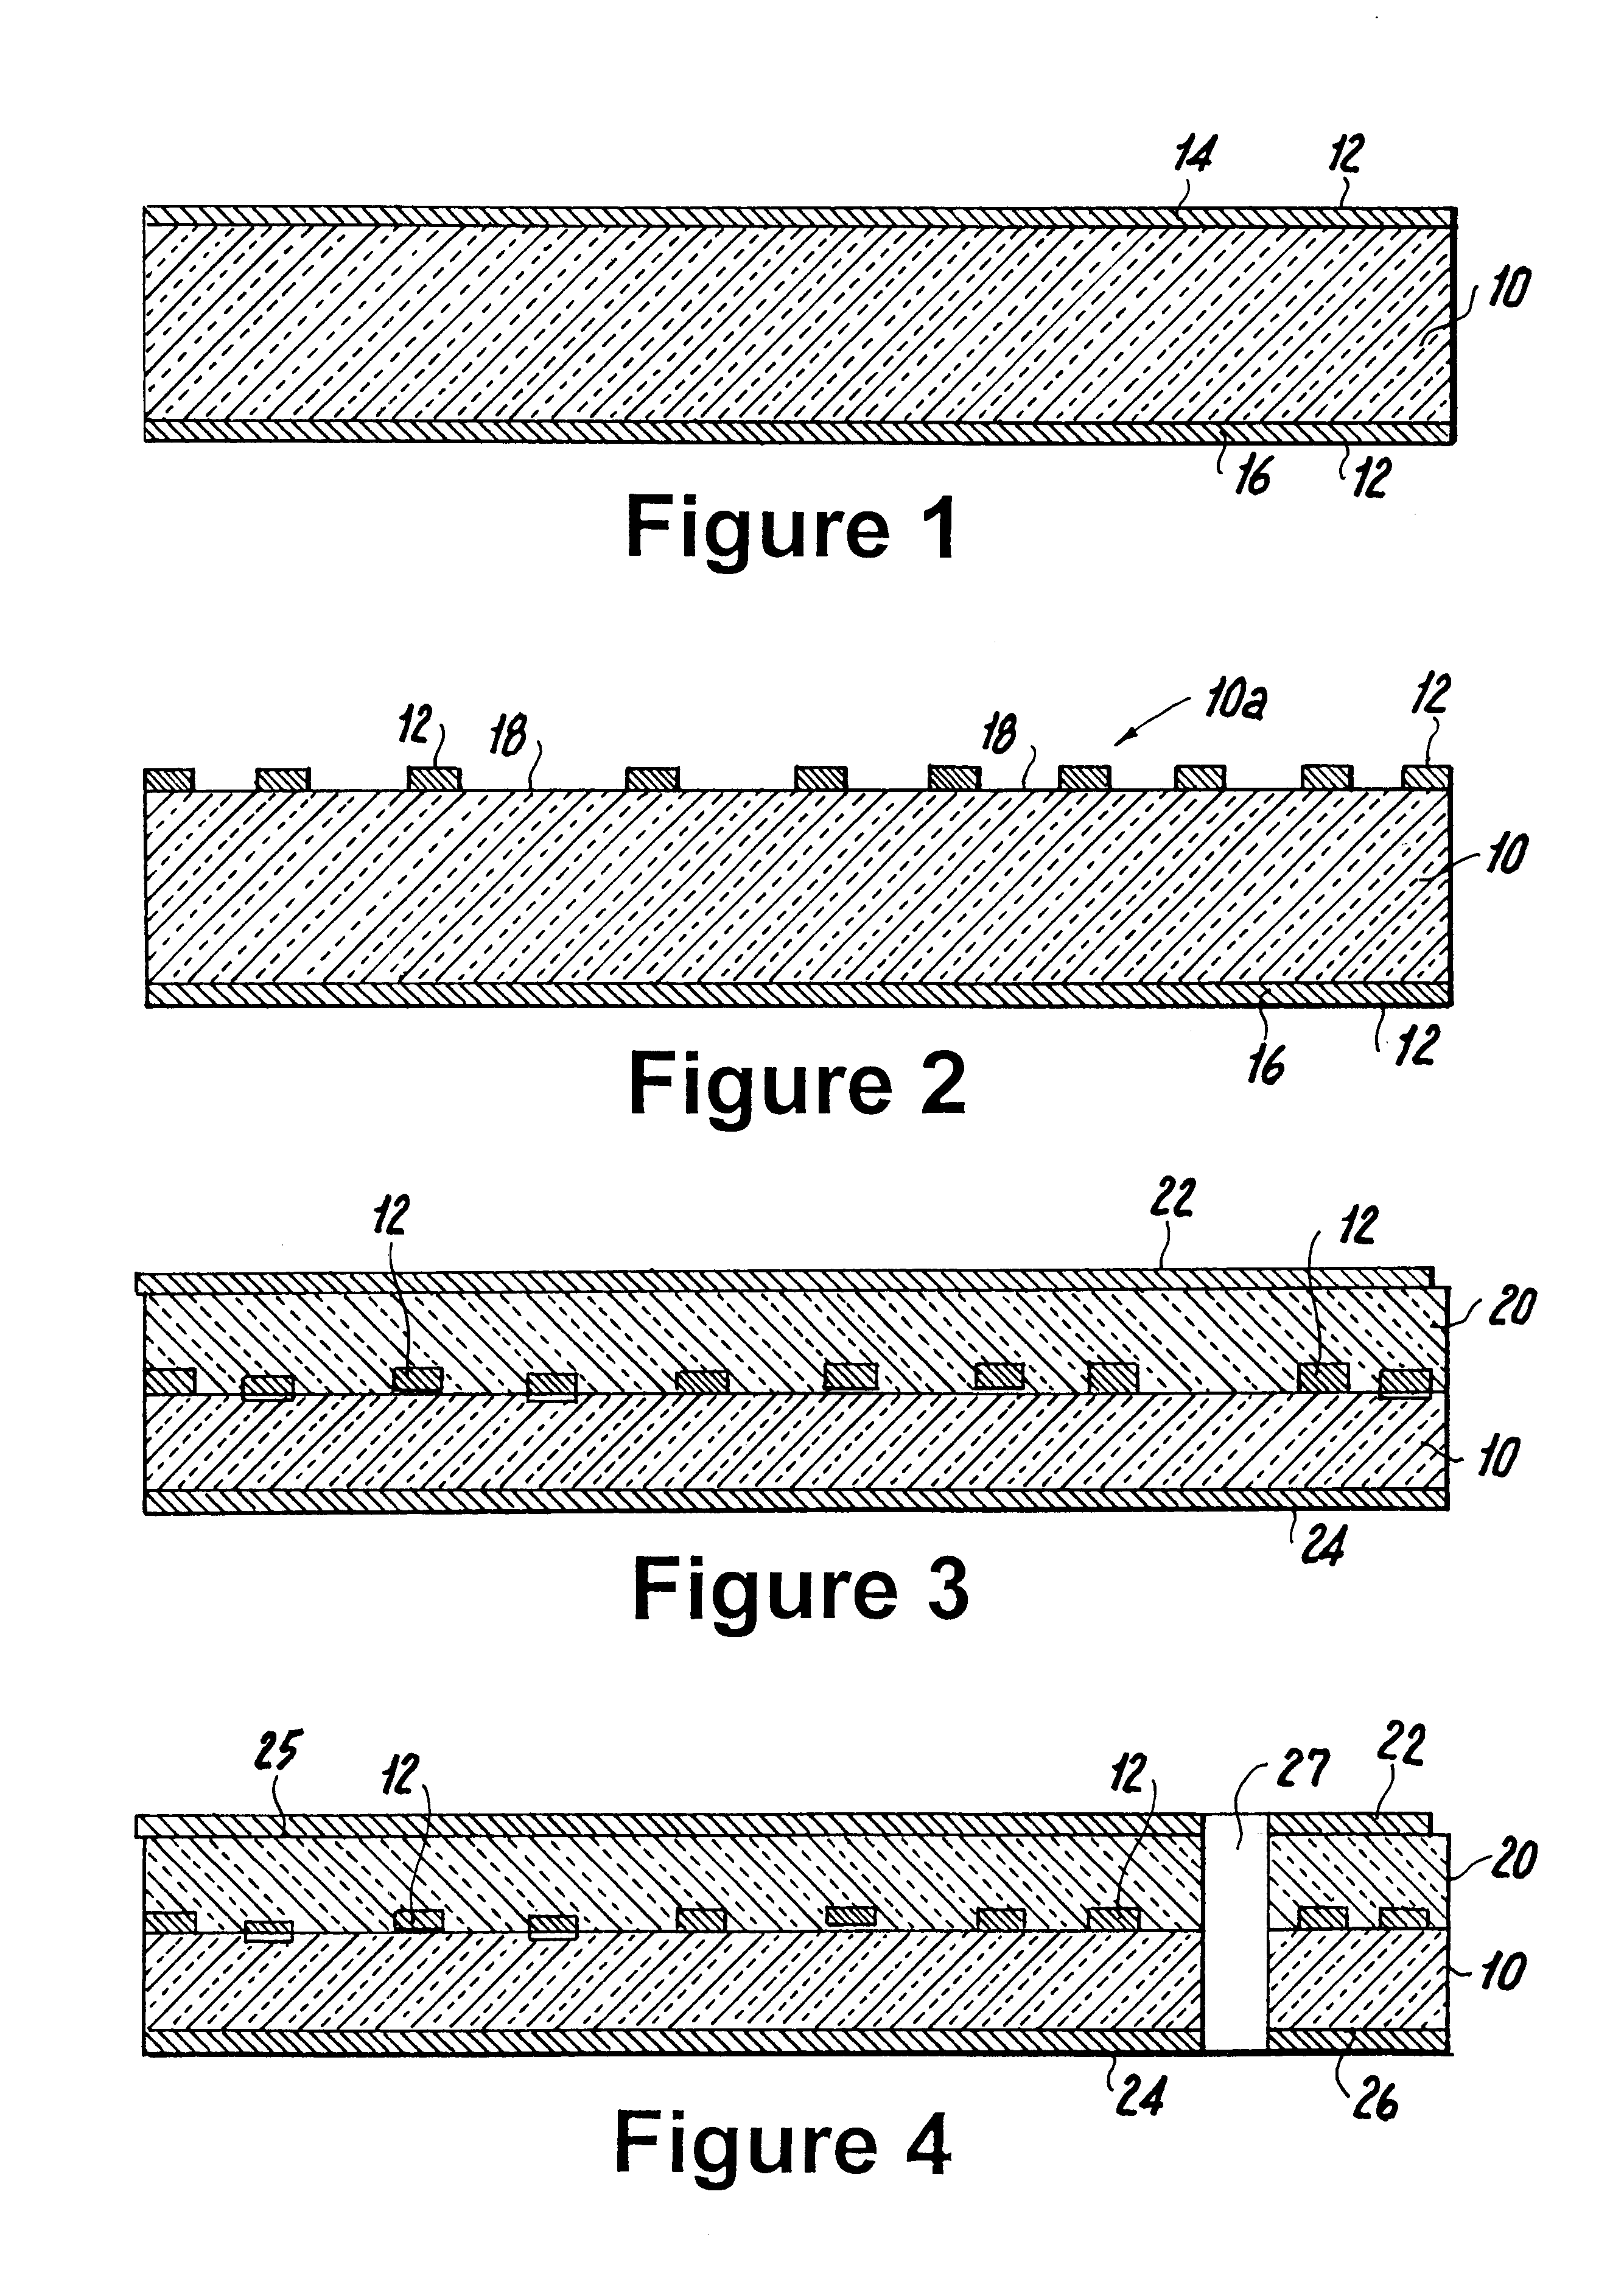 Structure for high speed printed wiring boards with multiple differential impedance-controlled layer